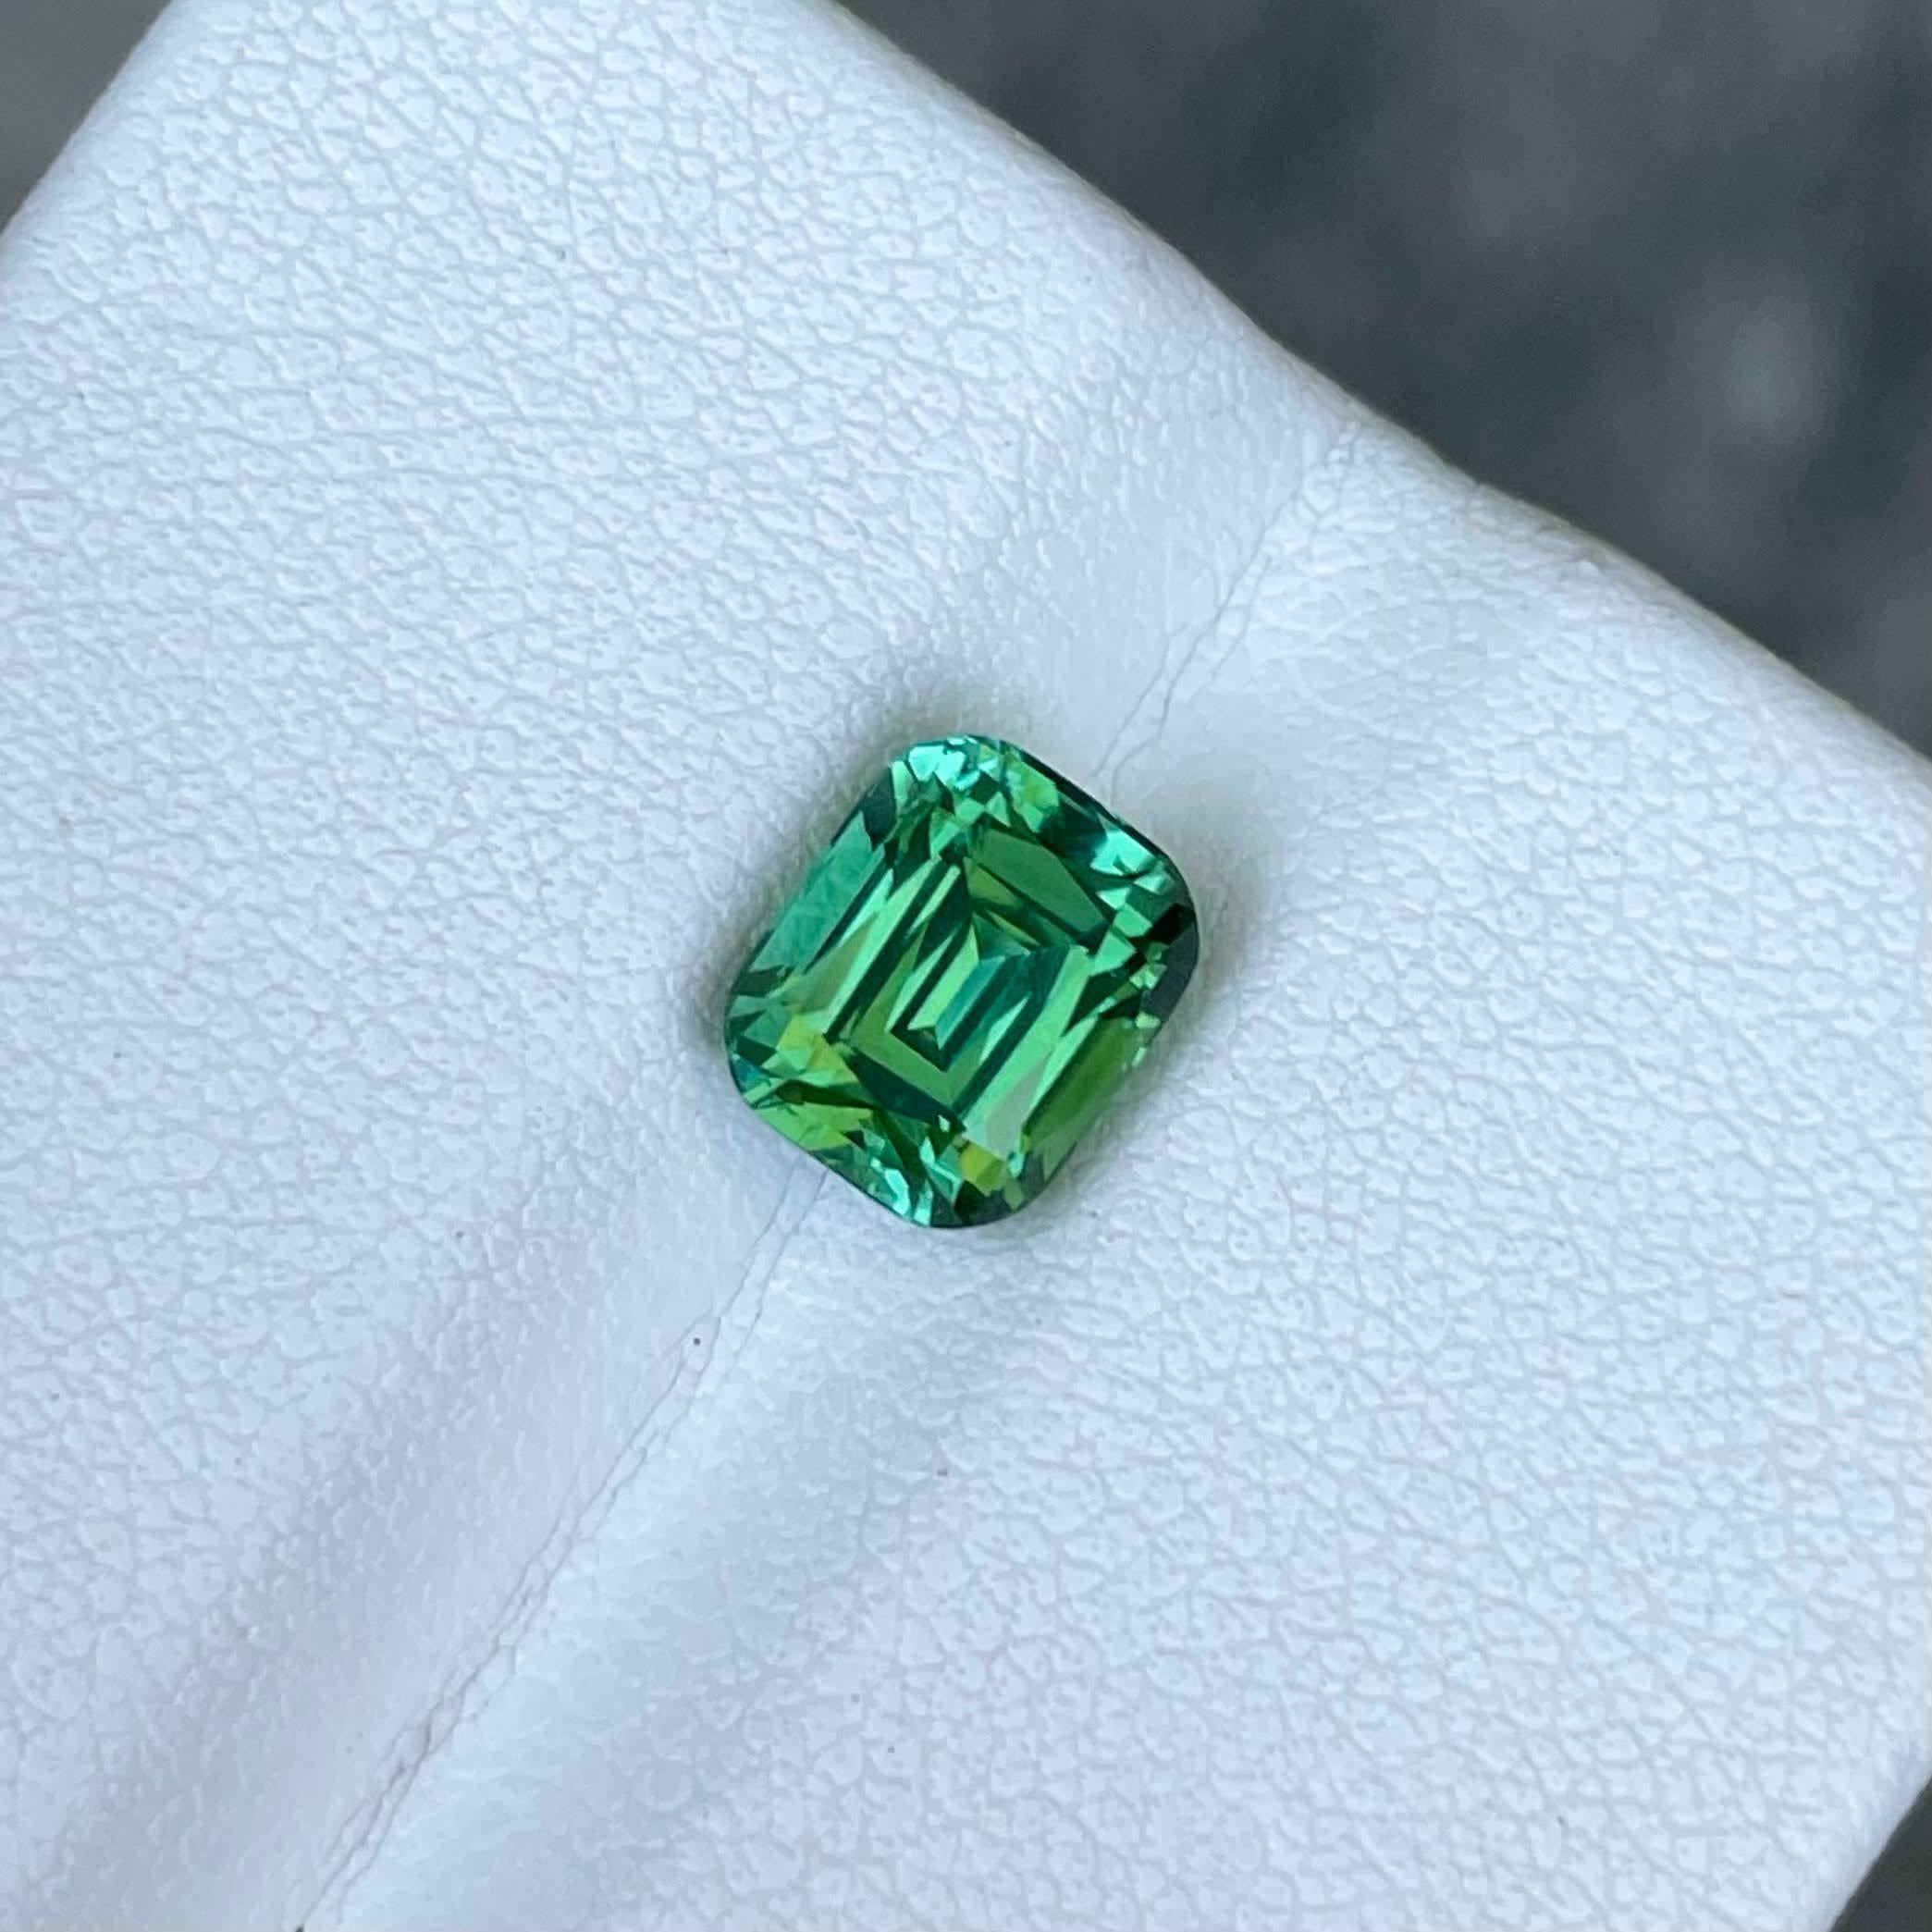 Weight 2.18 carats 
Dimensions 7.7x6.4x5.6 mm
Treatment none 
Origin Afghanistan 
Clarity VVS
Shape cushion 
Cut fancy cushion 




The 2.18 carats Mint Green Tourmaline is an exquisite natural gemstone sourced from Afghanistan, renowned for